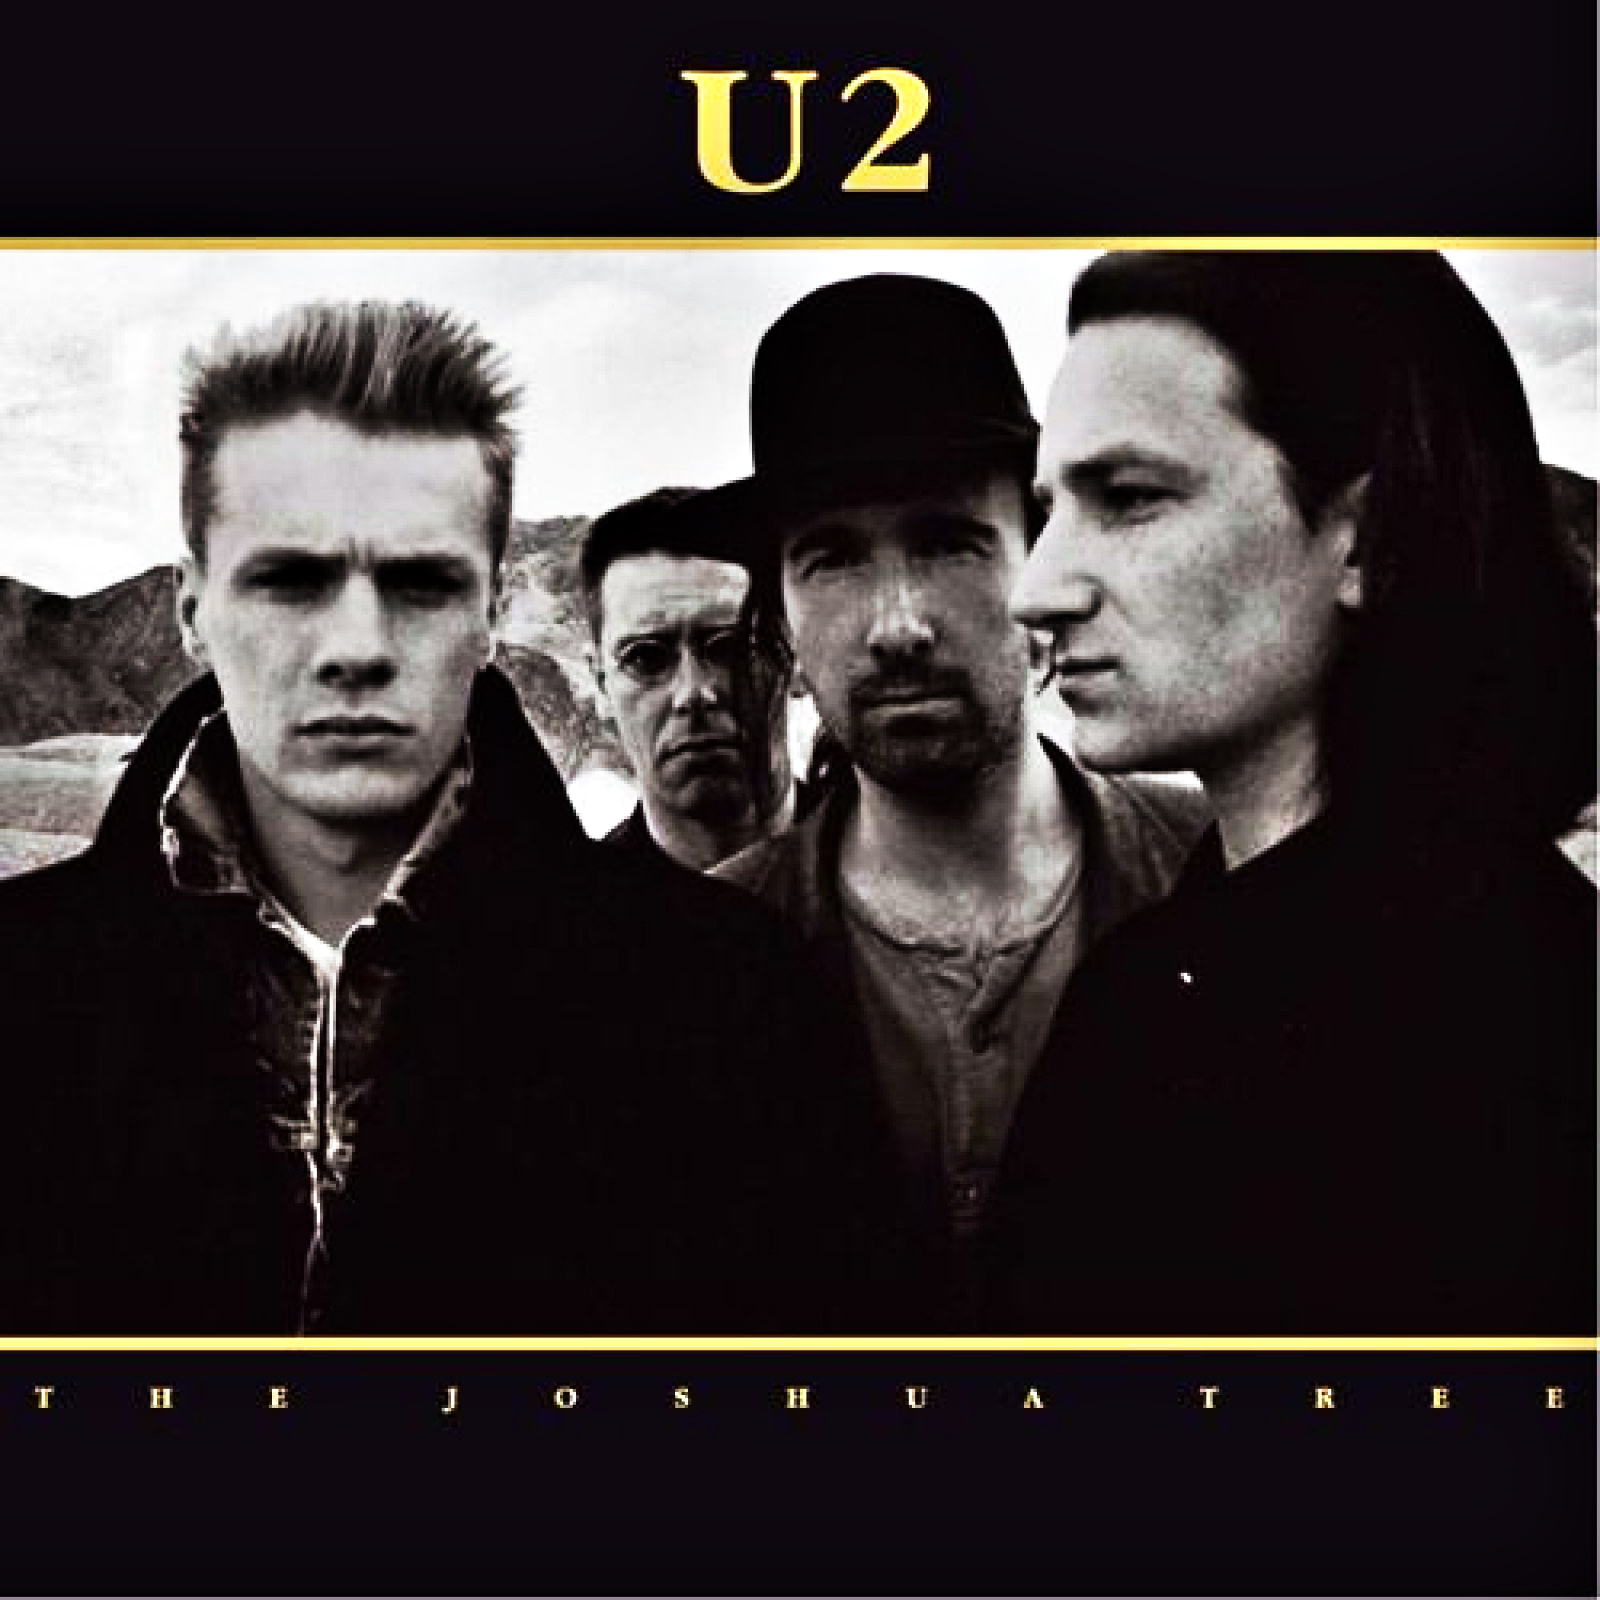 “I Still Haven't Found What I'm Looking For” - U2 1987